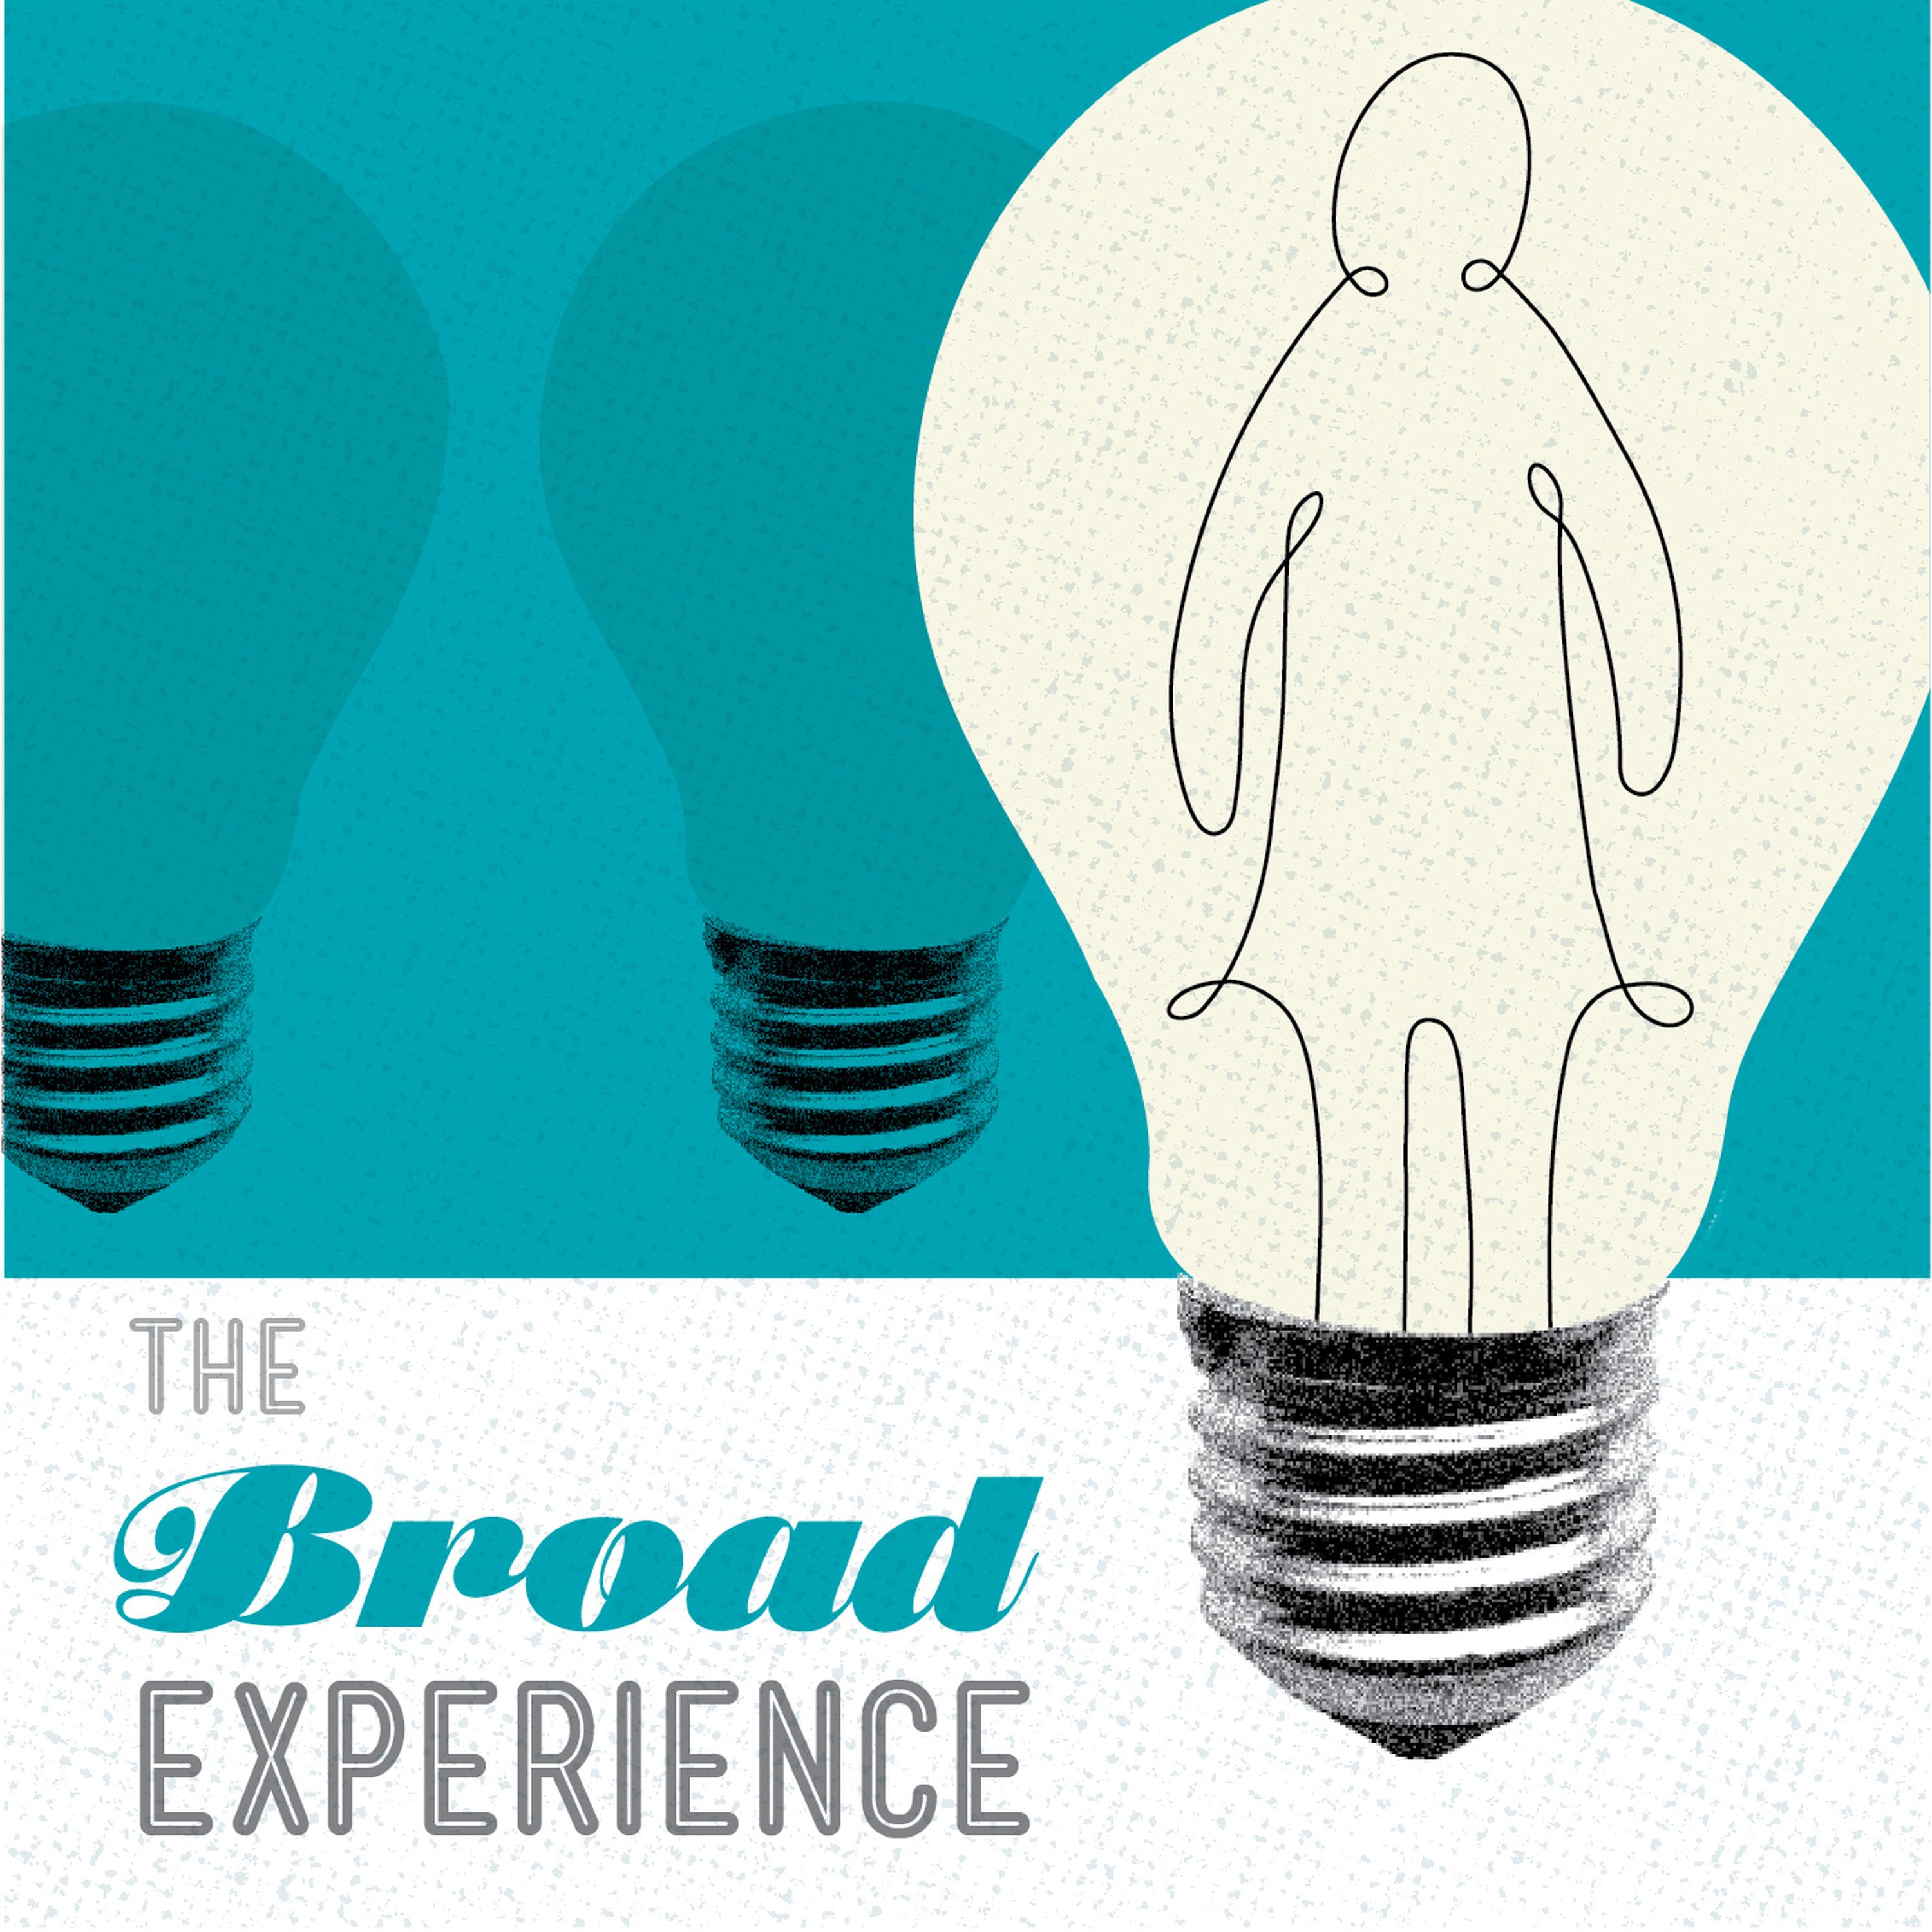 The Broad Experience 57: Women, work, and stress